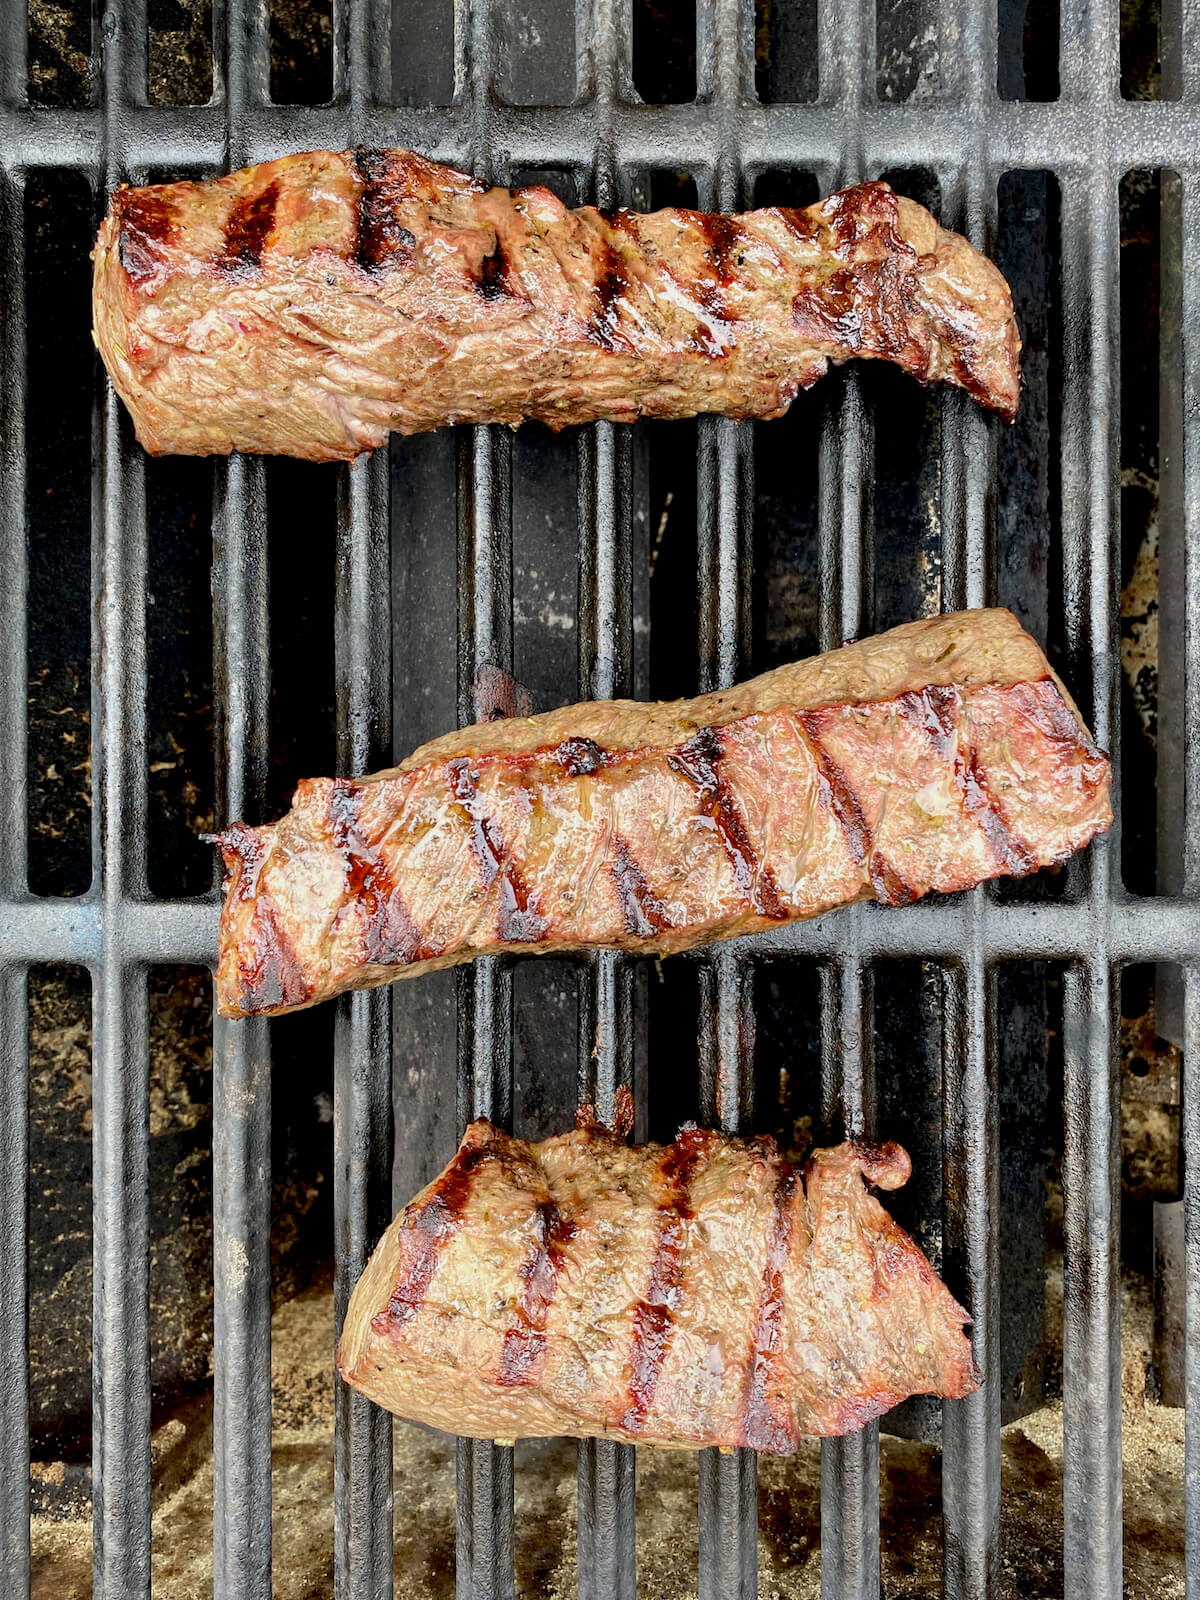 Strips of sirloin steak cooking on a grill.